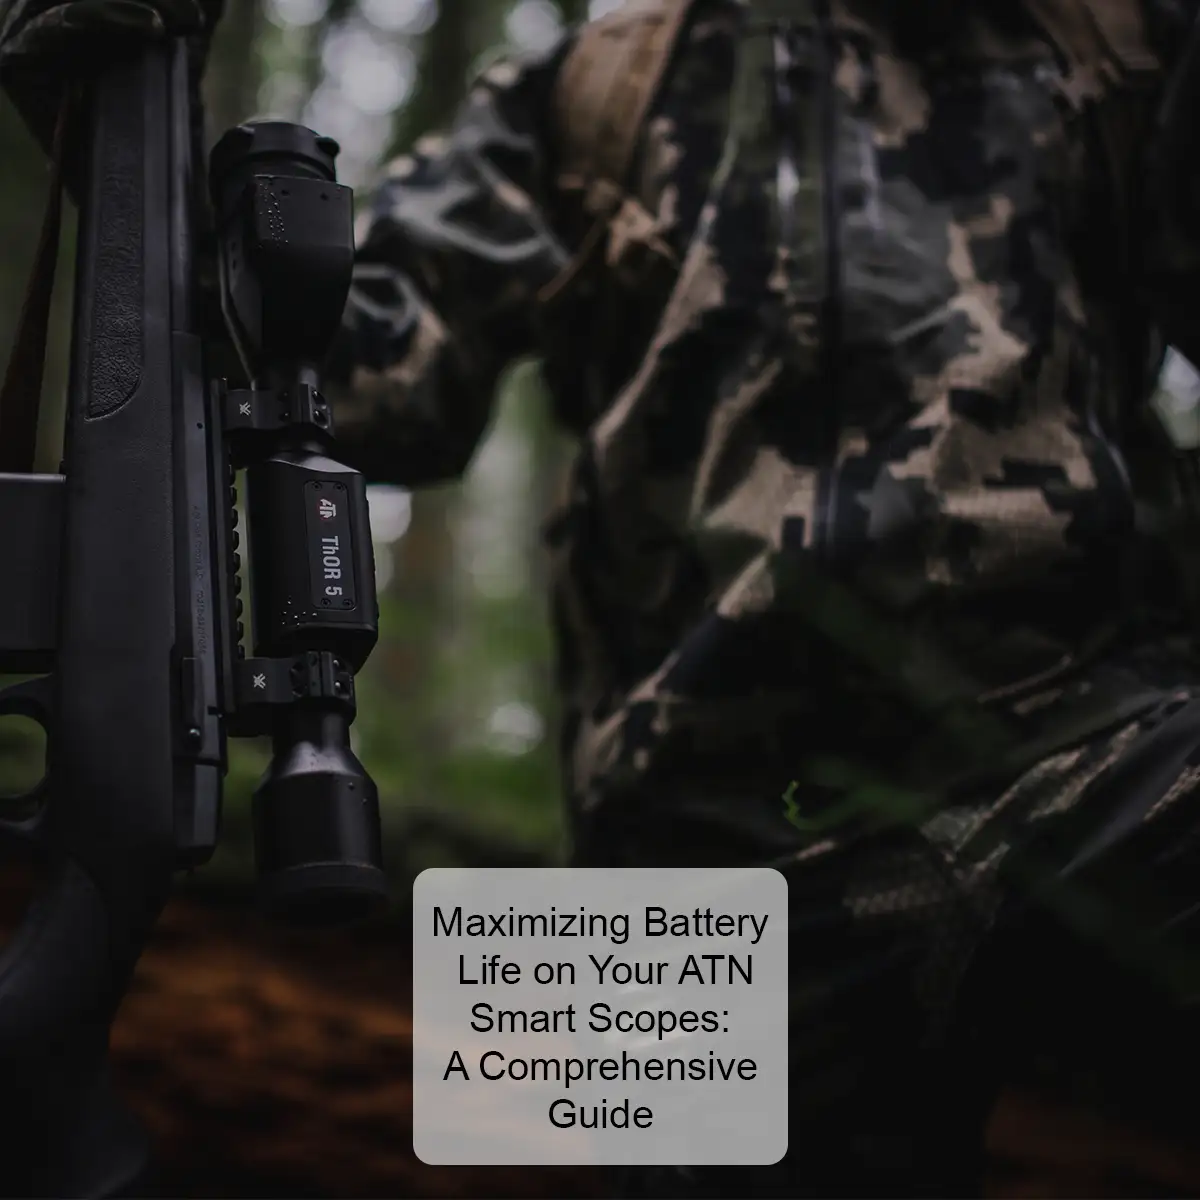 Maximizing Battery Life on Your ATN Smart Scopes: A Comprehensive Guide